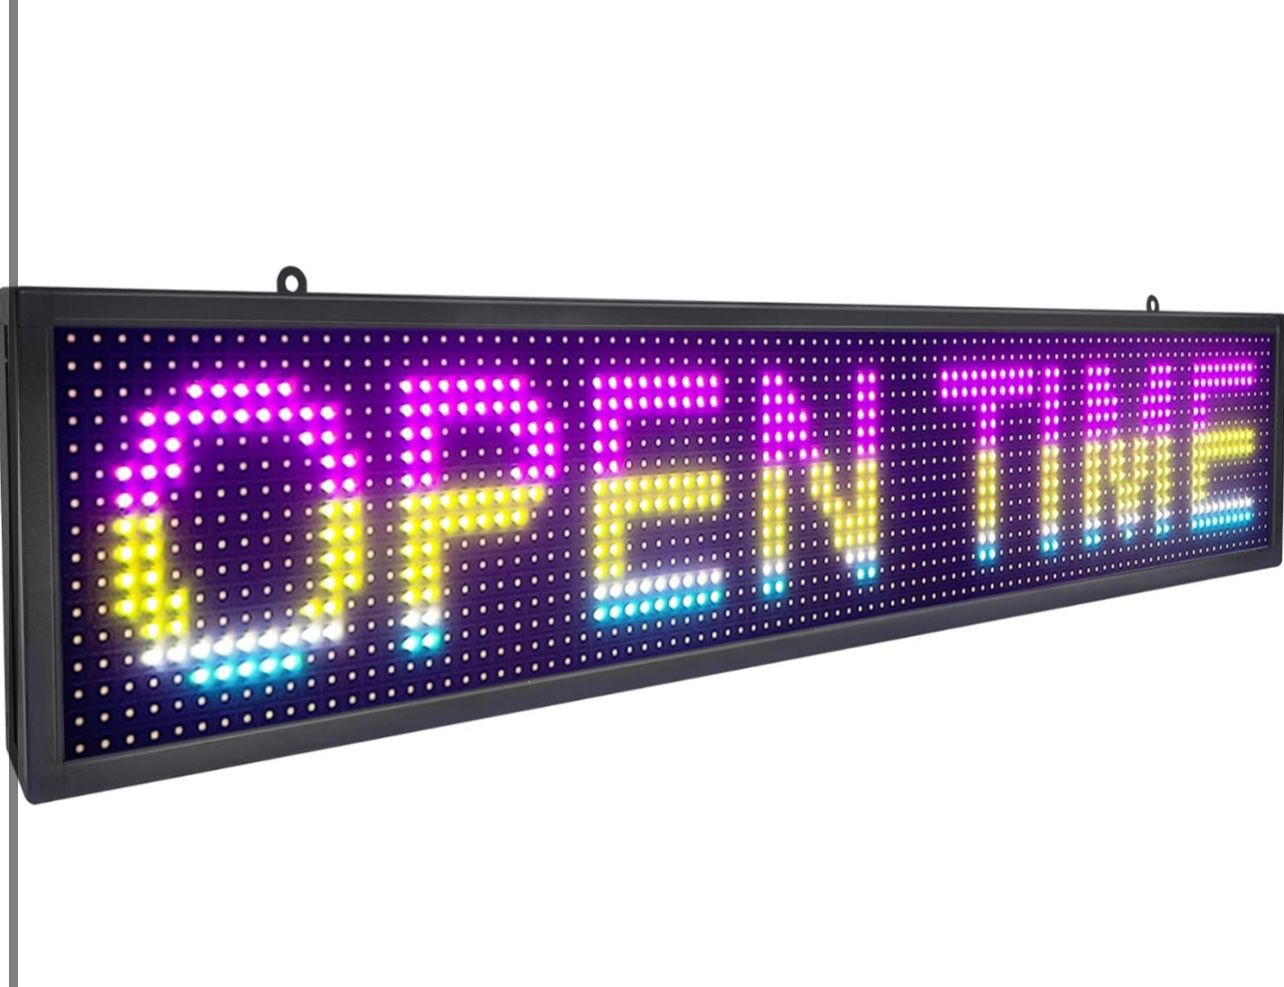 Brand New In The Box- P10 WiFi LED Scrolling Sign 40" x 8" LED Signs RGB Full Color High Brightness Programmable LED Advertising Sign Board with High 